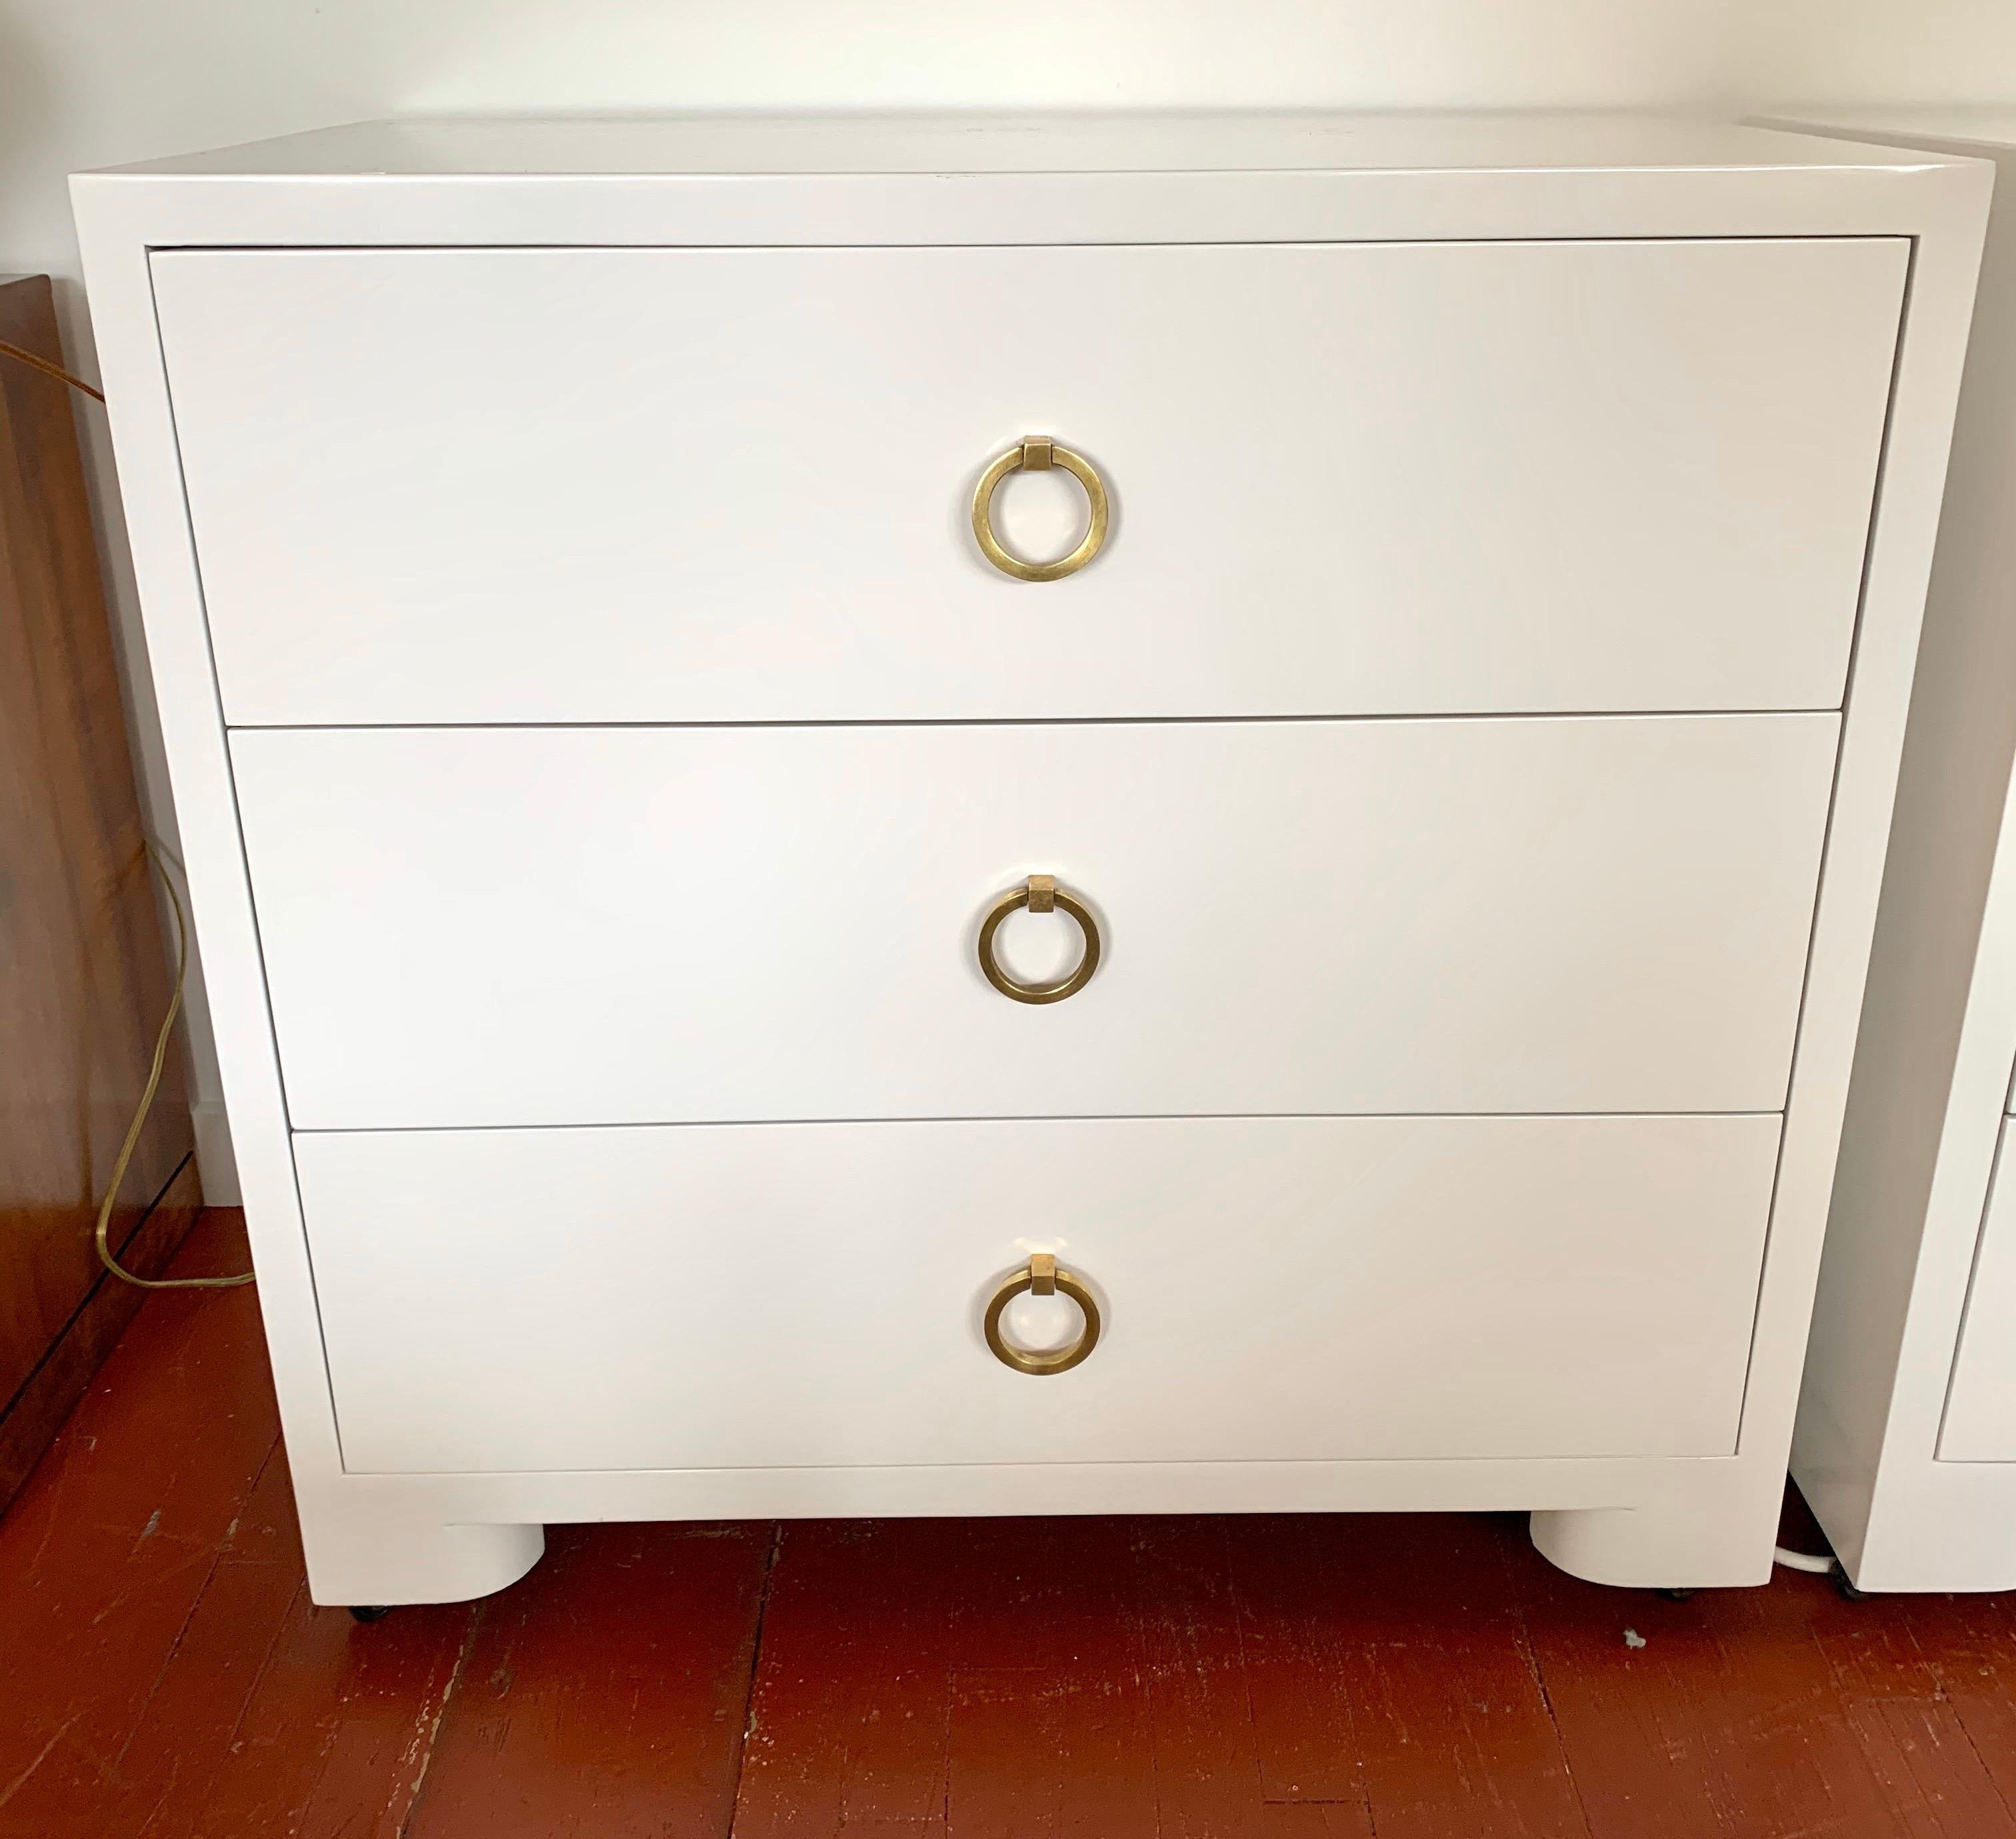 Elegant newly lacquered small chest on casters for ease of movement. True period piece that has been newly lacquered in white and has original brass hardware.